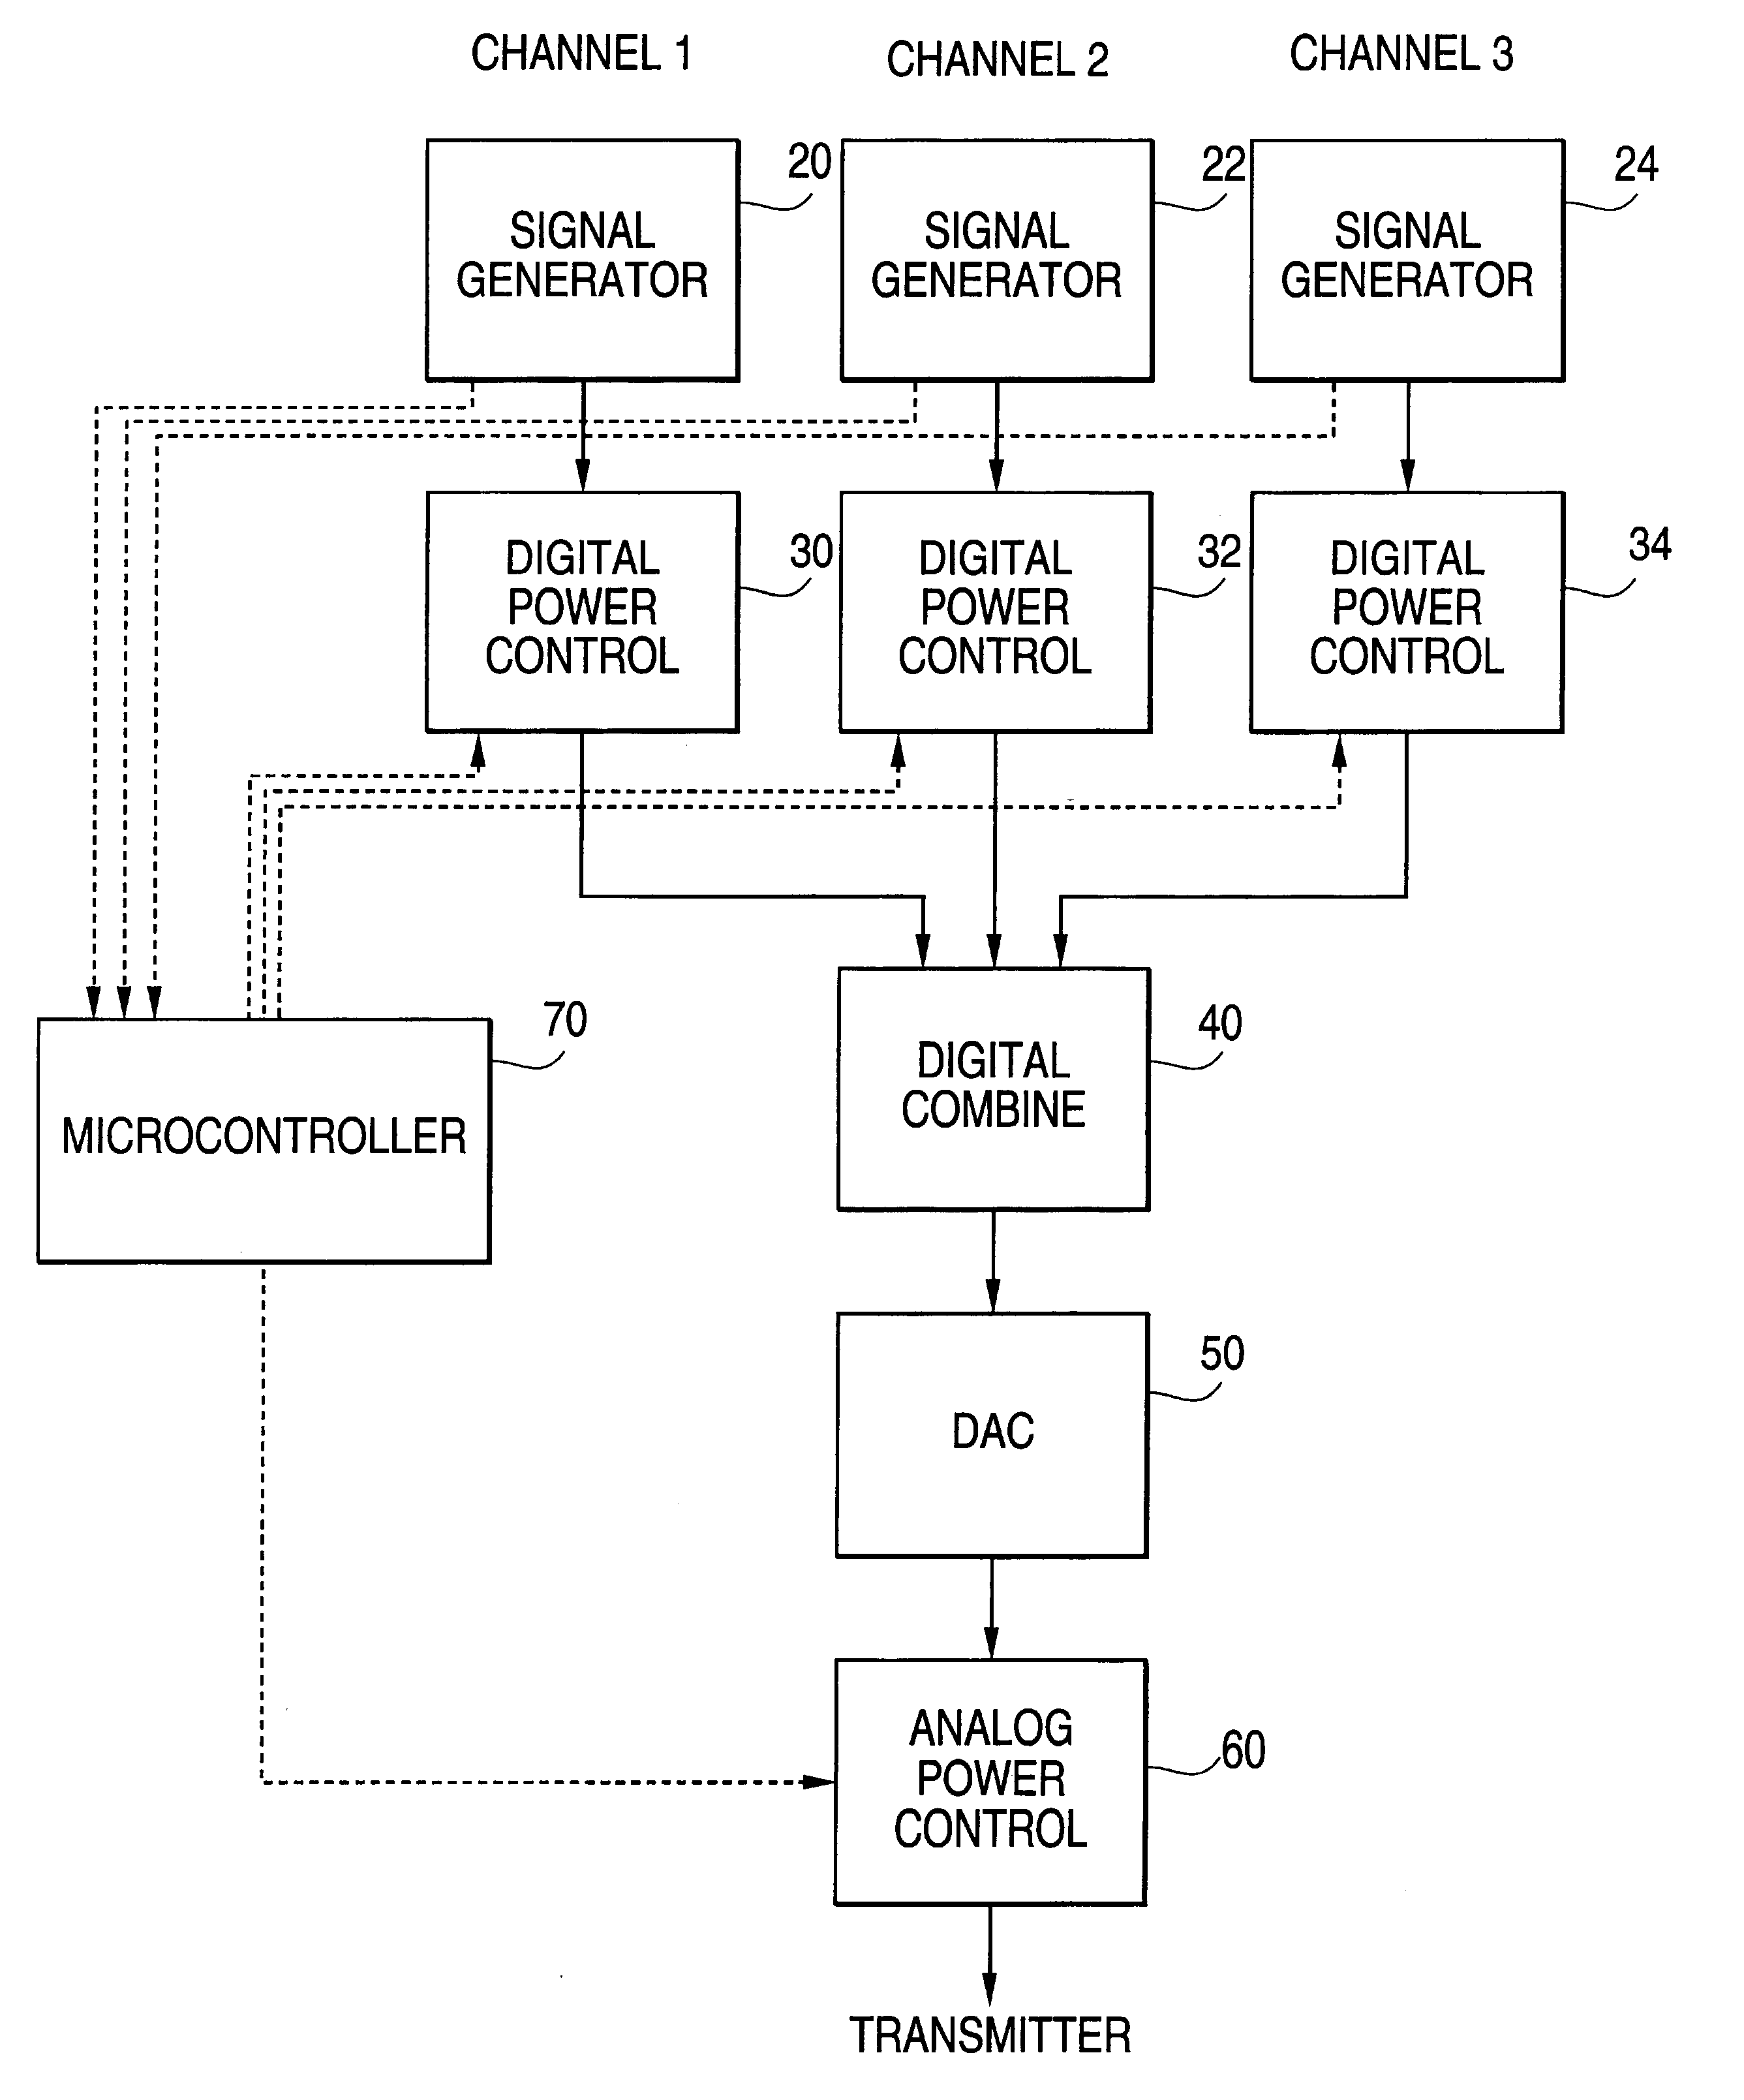 Wideband multicarrier power control for a cellular PCS basestation tranmitter